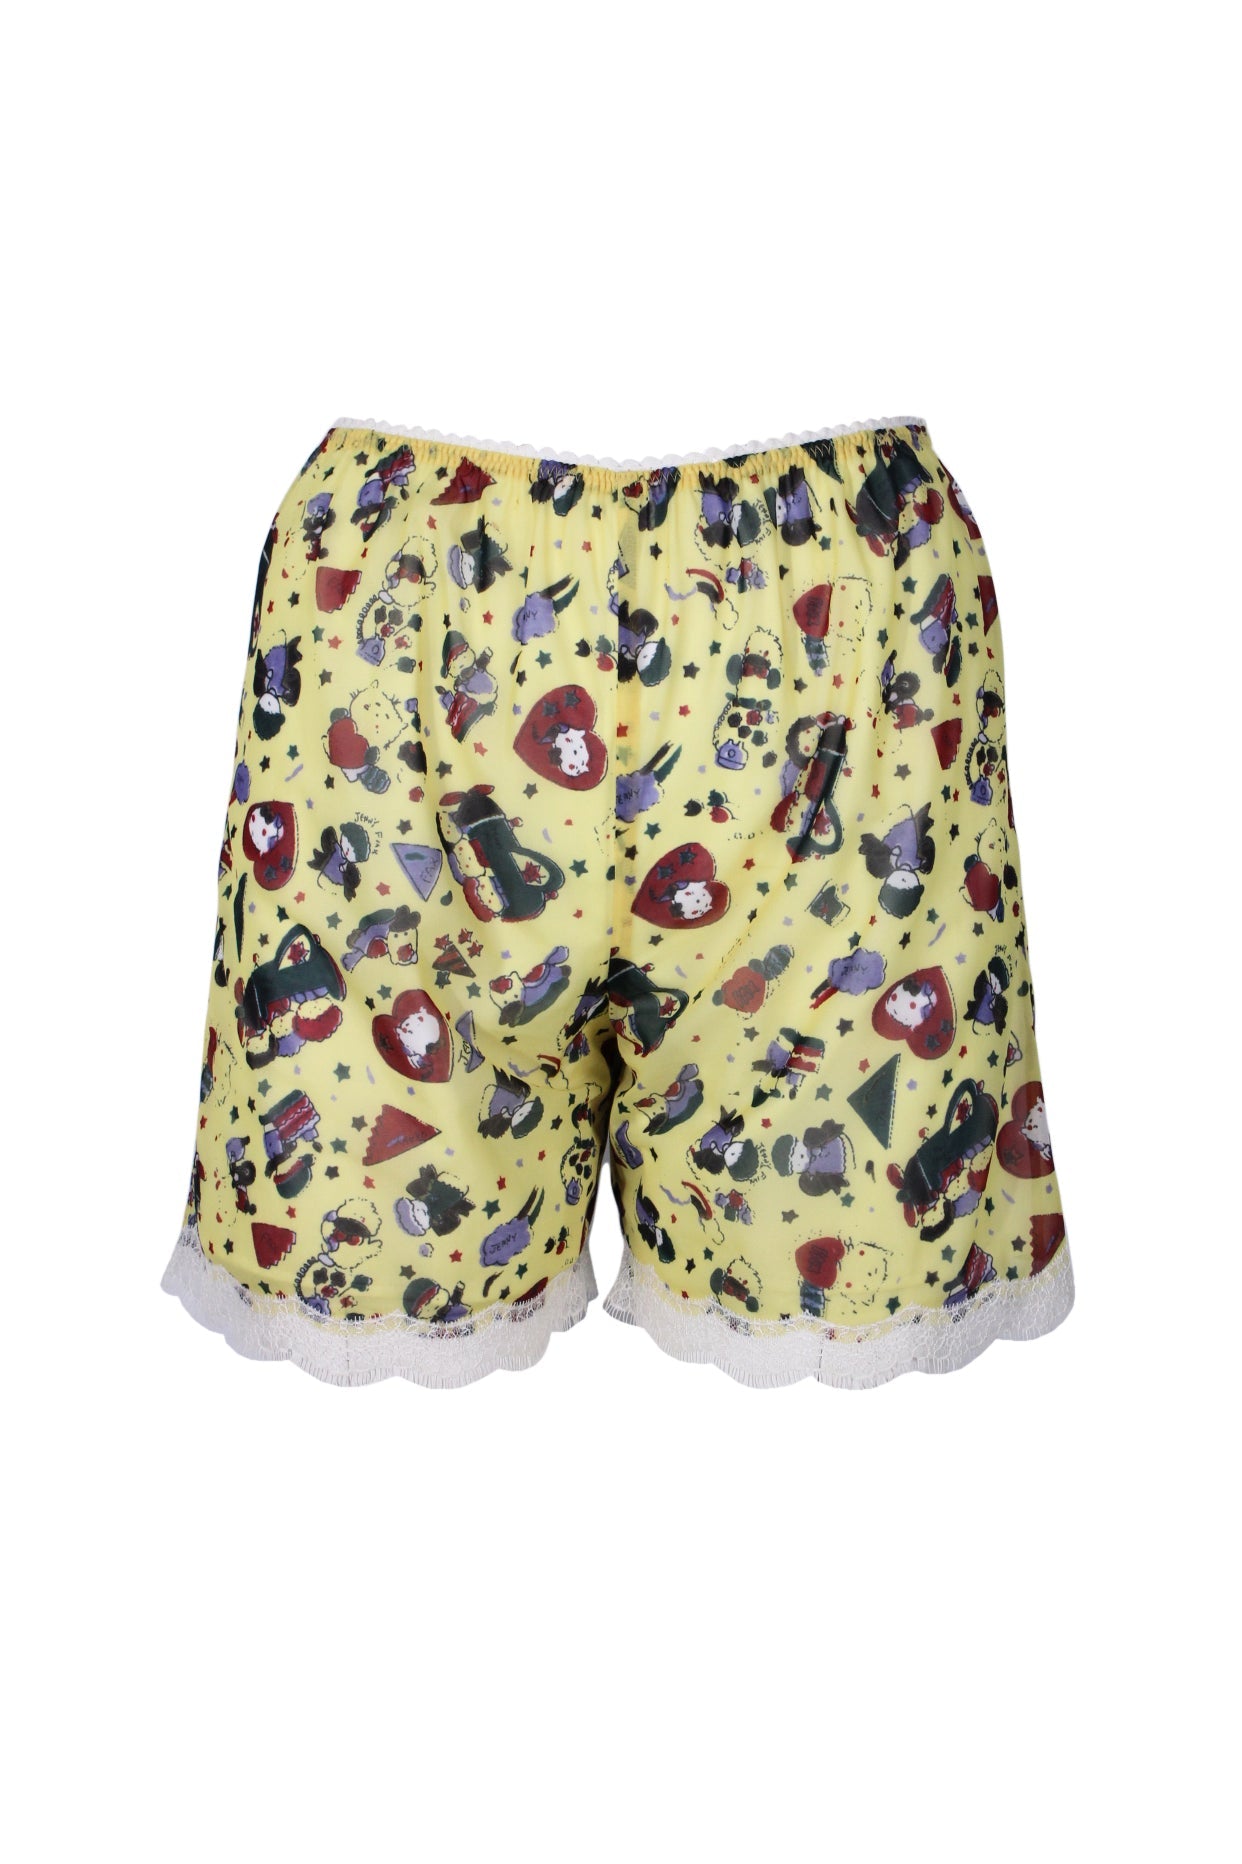 front angle mikio sakabe jenny fax yellow/multicolor shorts. featuring semi-sheer main with illustration/'jenny fax' print throughout, elastic waist with zig-zag trim, and lace-embellished hem.